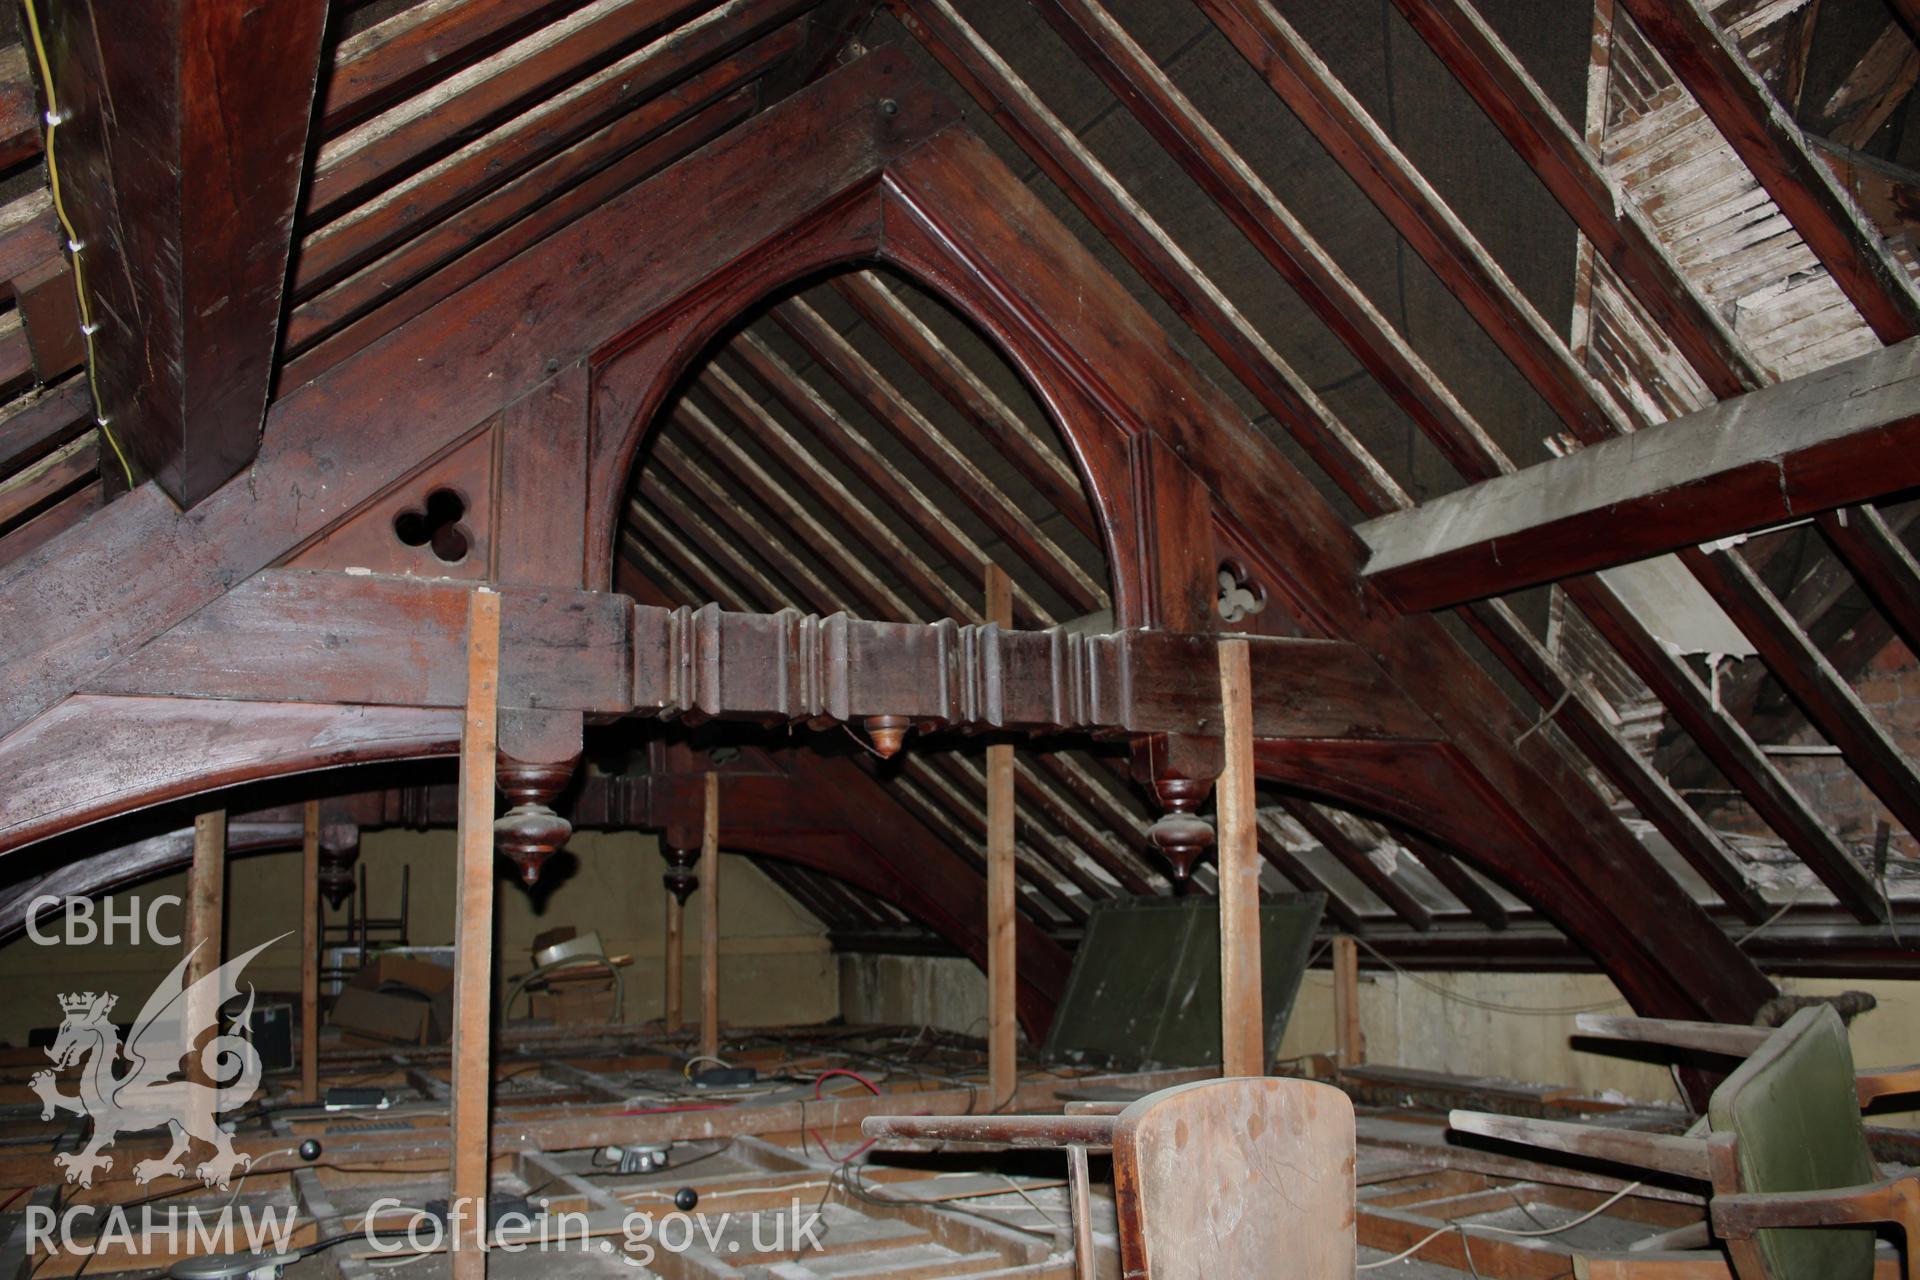 Colour photograph of two trusses over the central first floor meeting room at the Conservative Club on Portland Place in Denbigh. Photographic survey conducted by Sue Fielding on 31st August 2011.